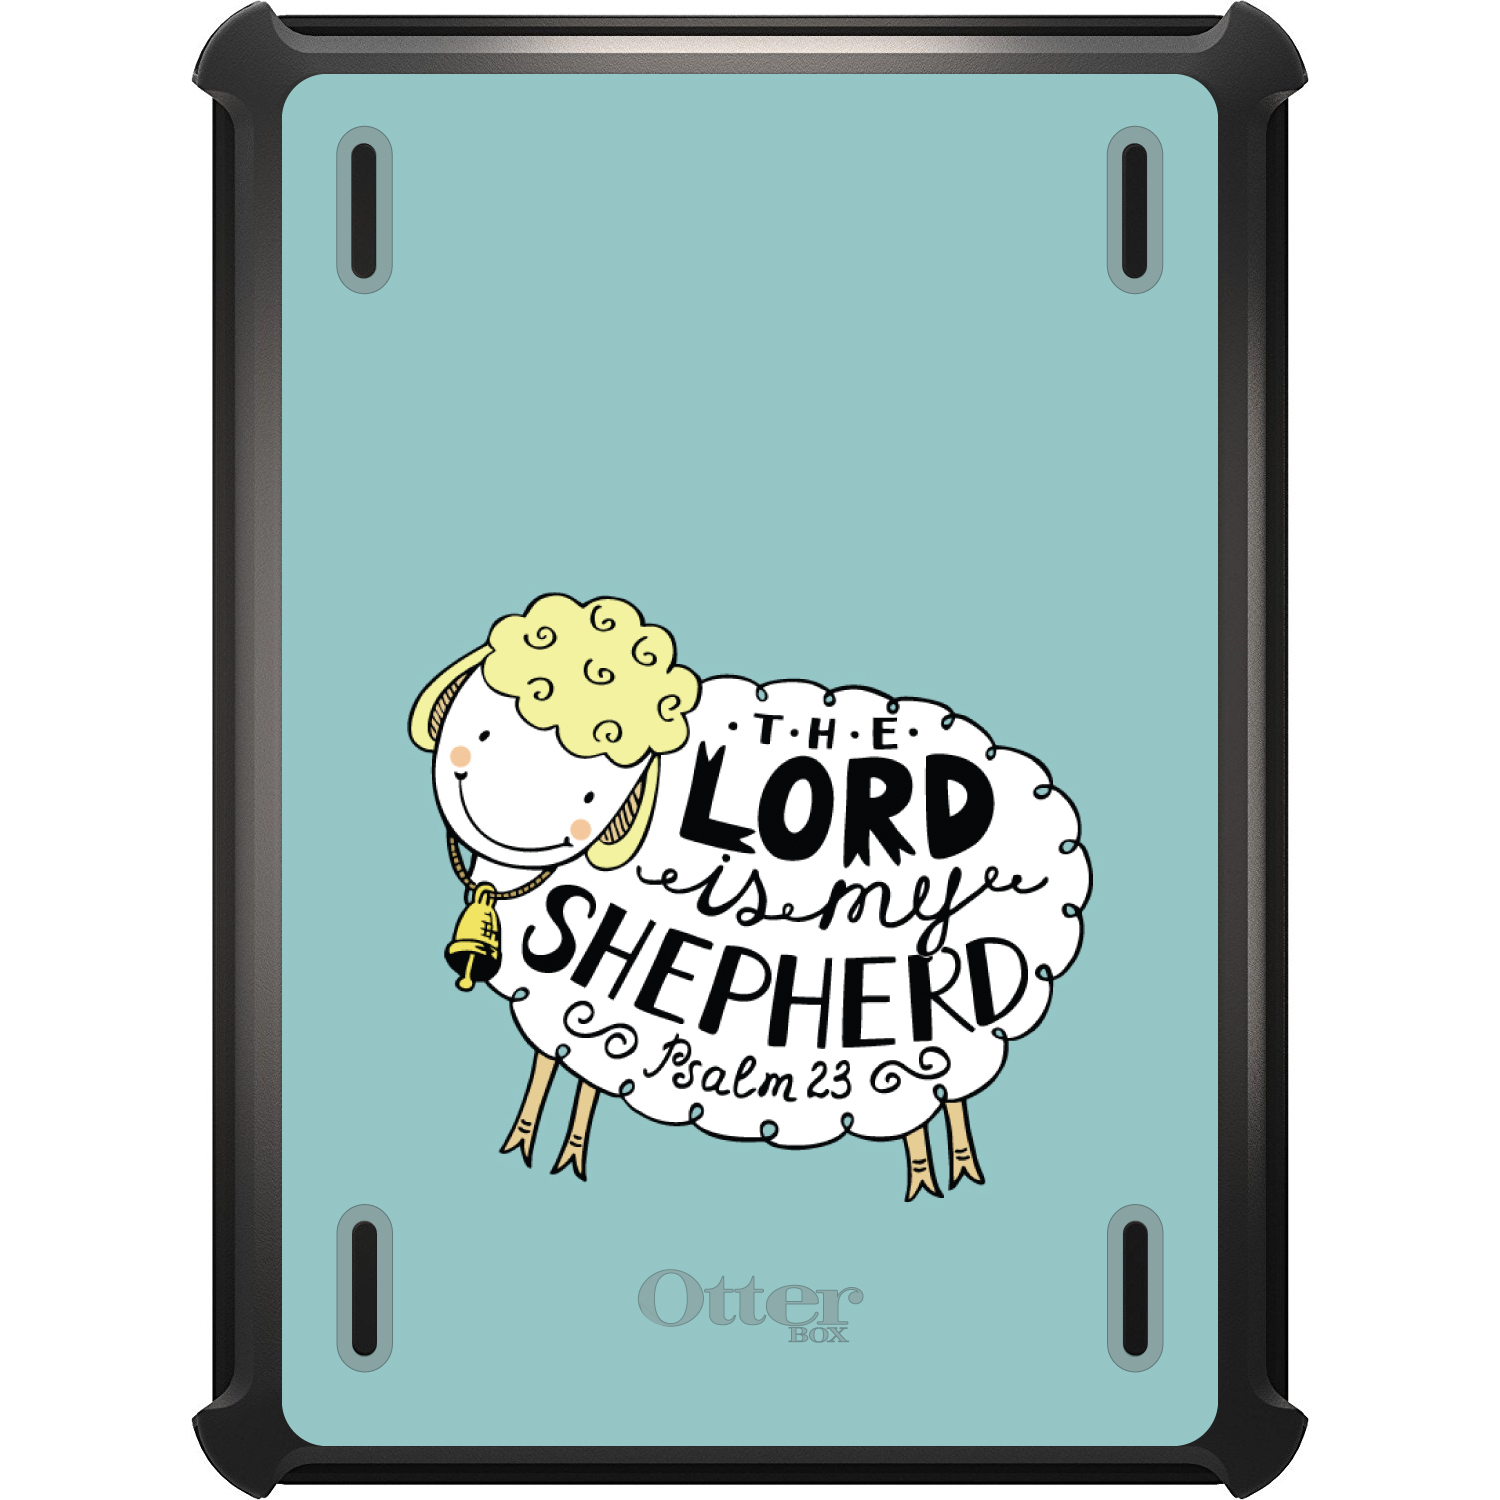 thumbnail 2 - OtterBox Defender for iPad Pro / Air / Mini - Psalm 23 The Lord is My Shepherd